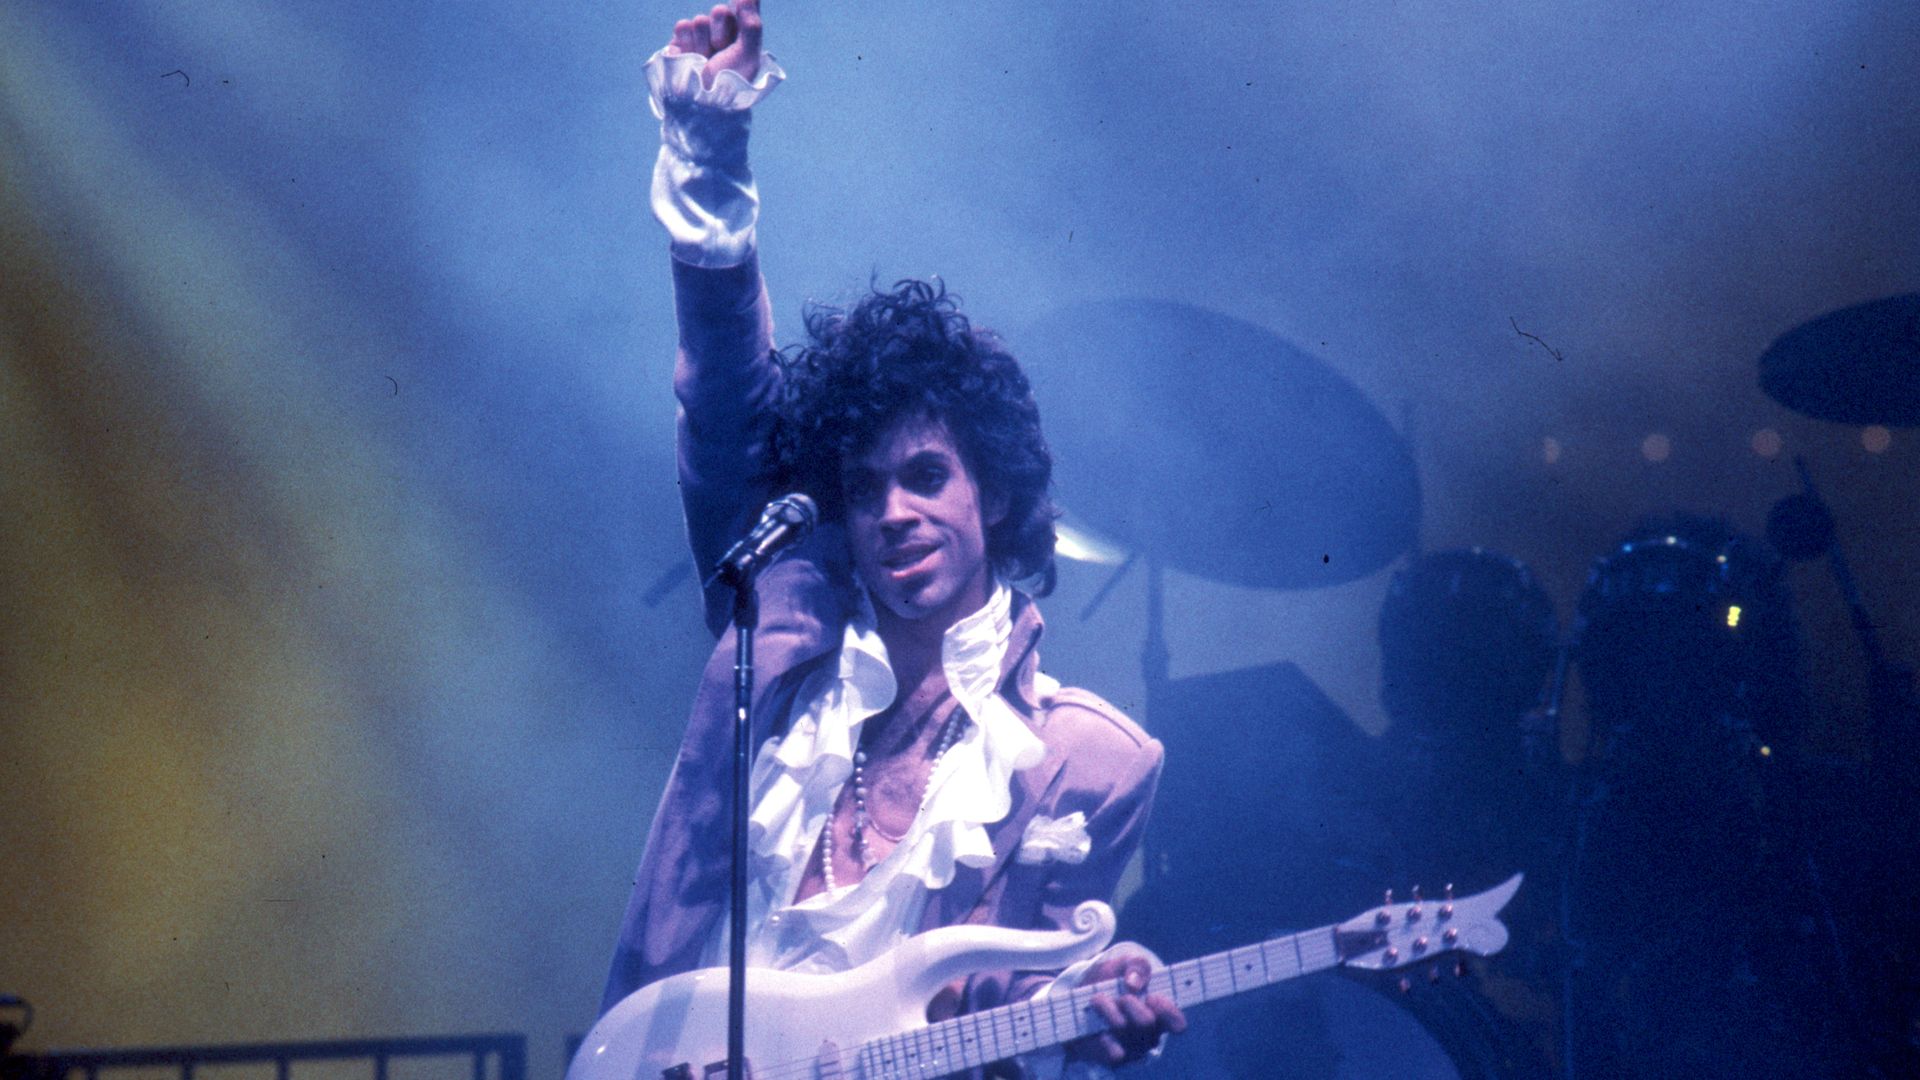 Price holds up his first while playing the guitar in a hazy room 